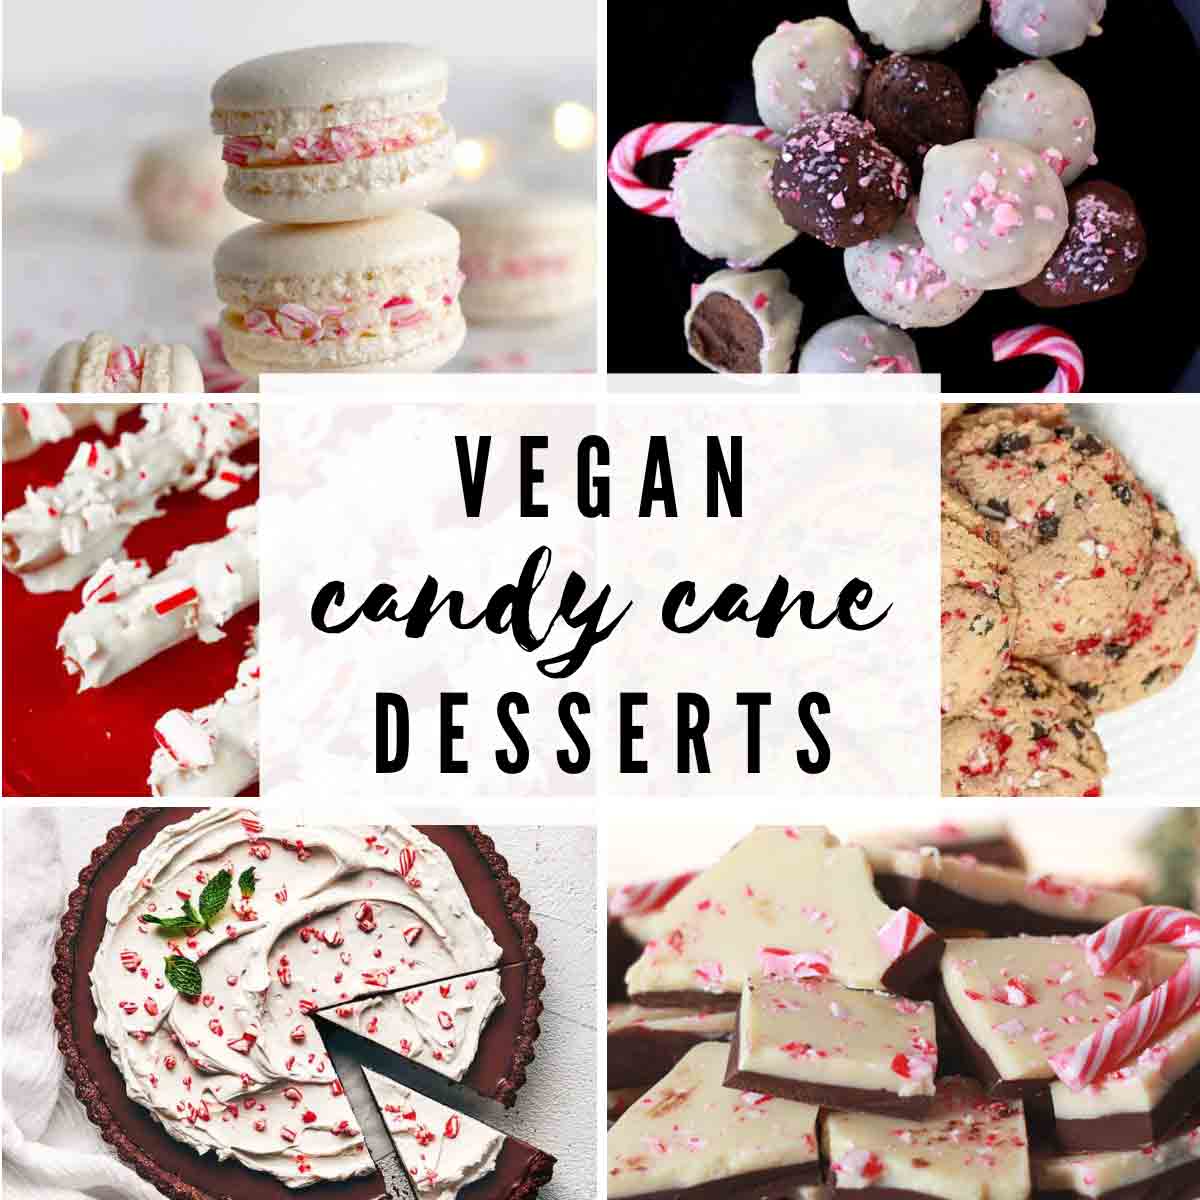 Vegan Candy Cane Desserts Images With Text Overlay